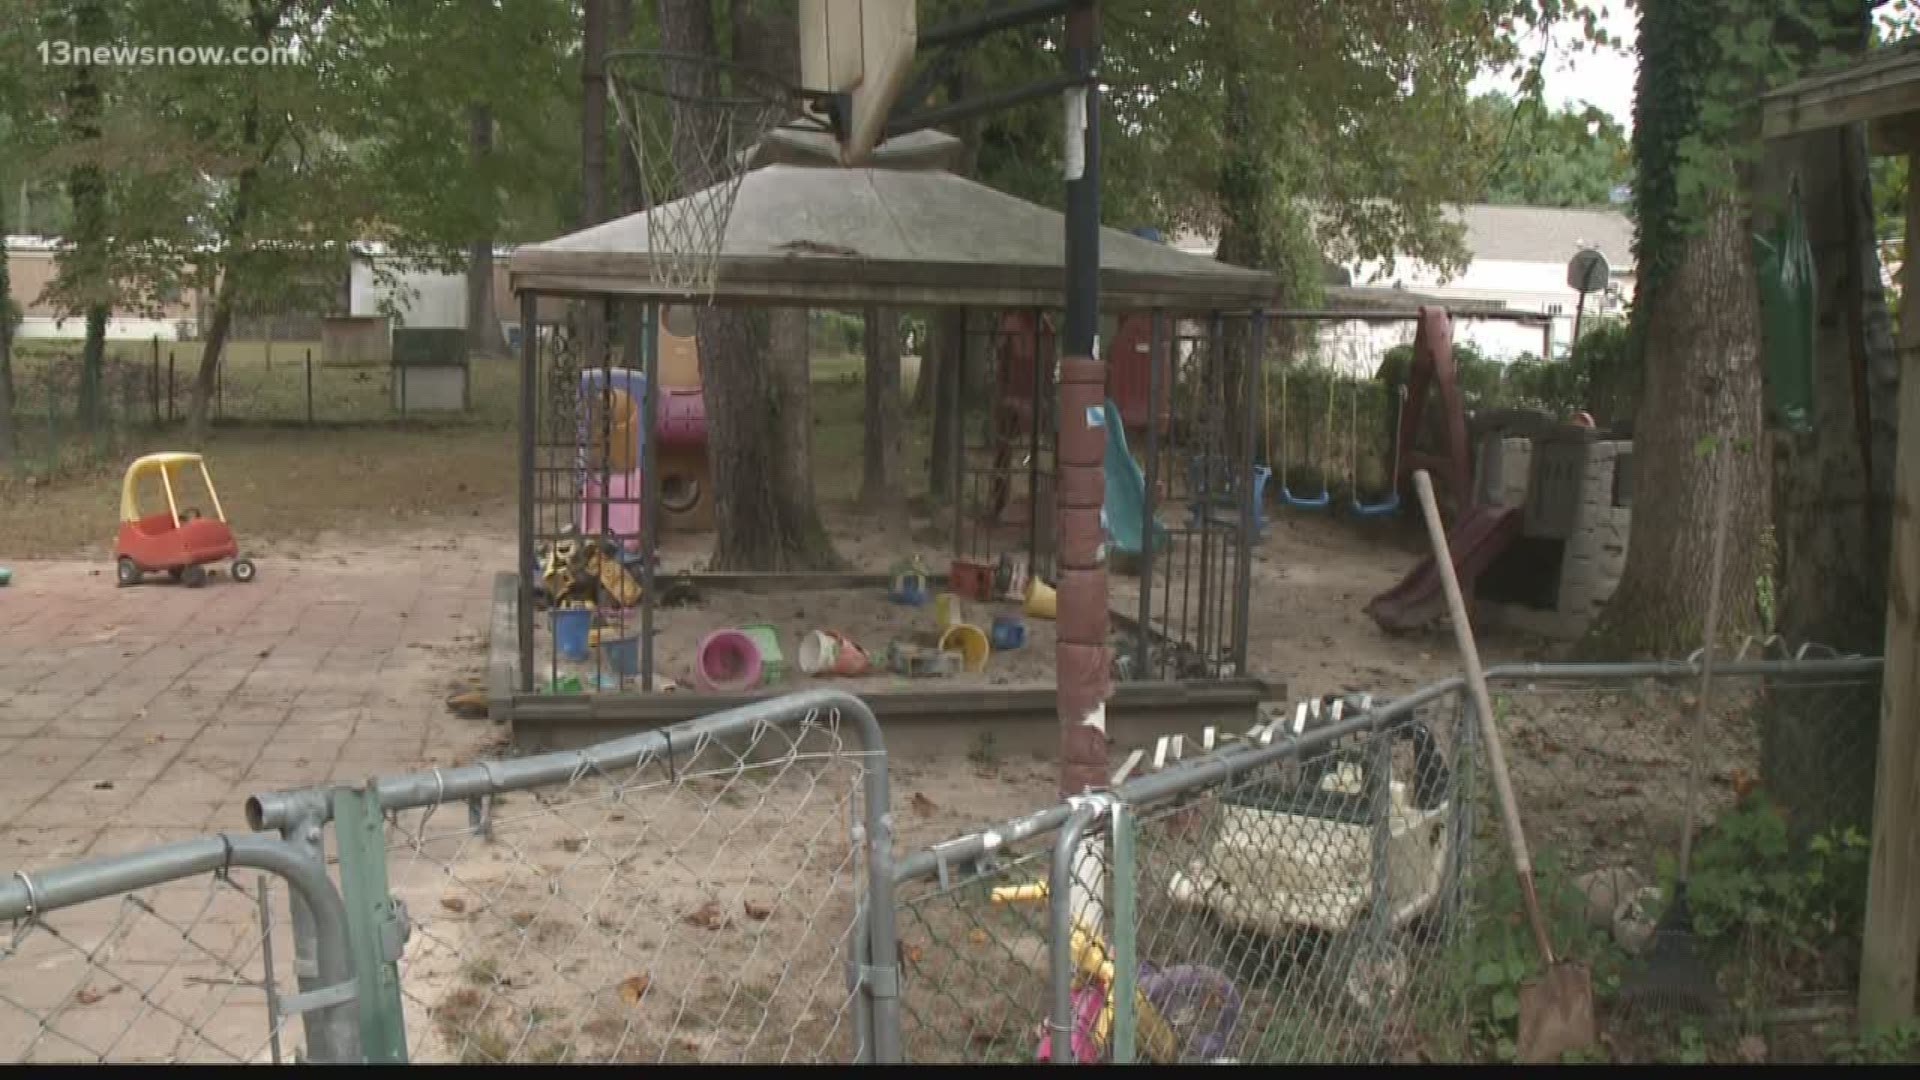 A child suffered a serious head injury at a home daycare in Gloucester.